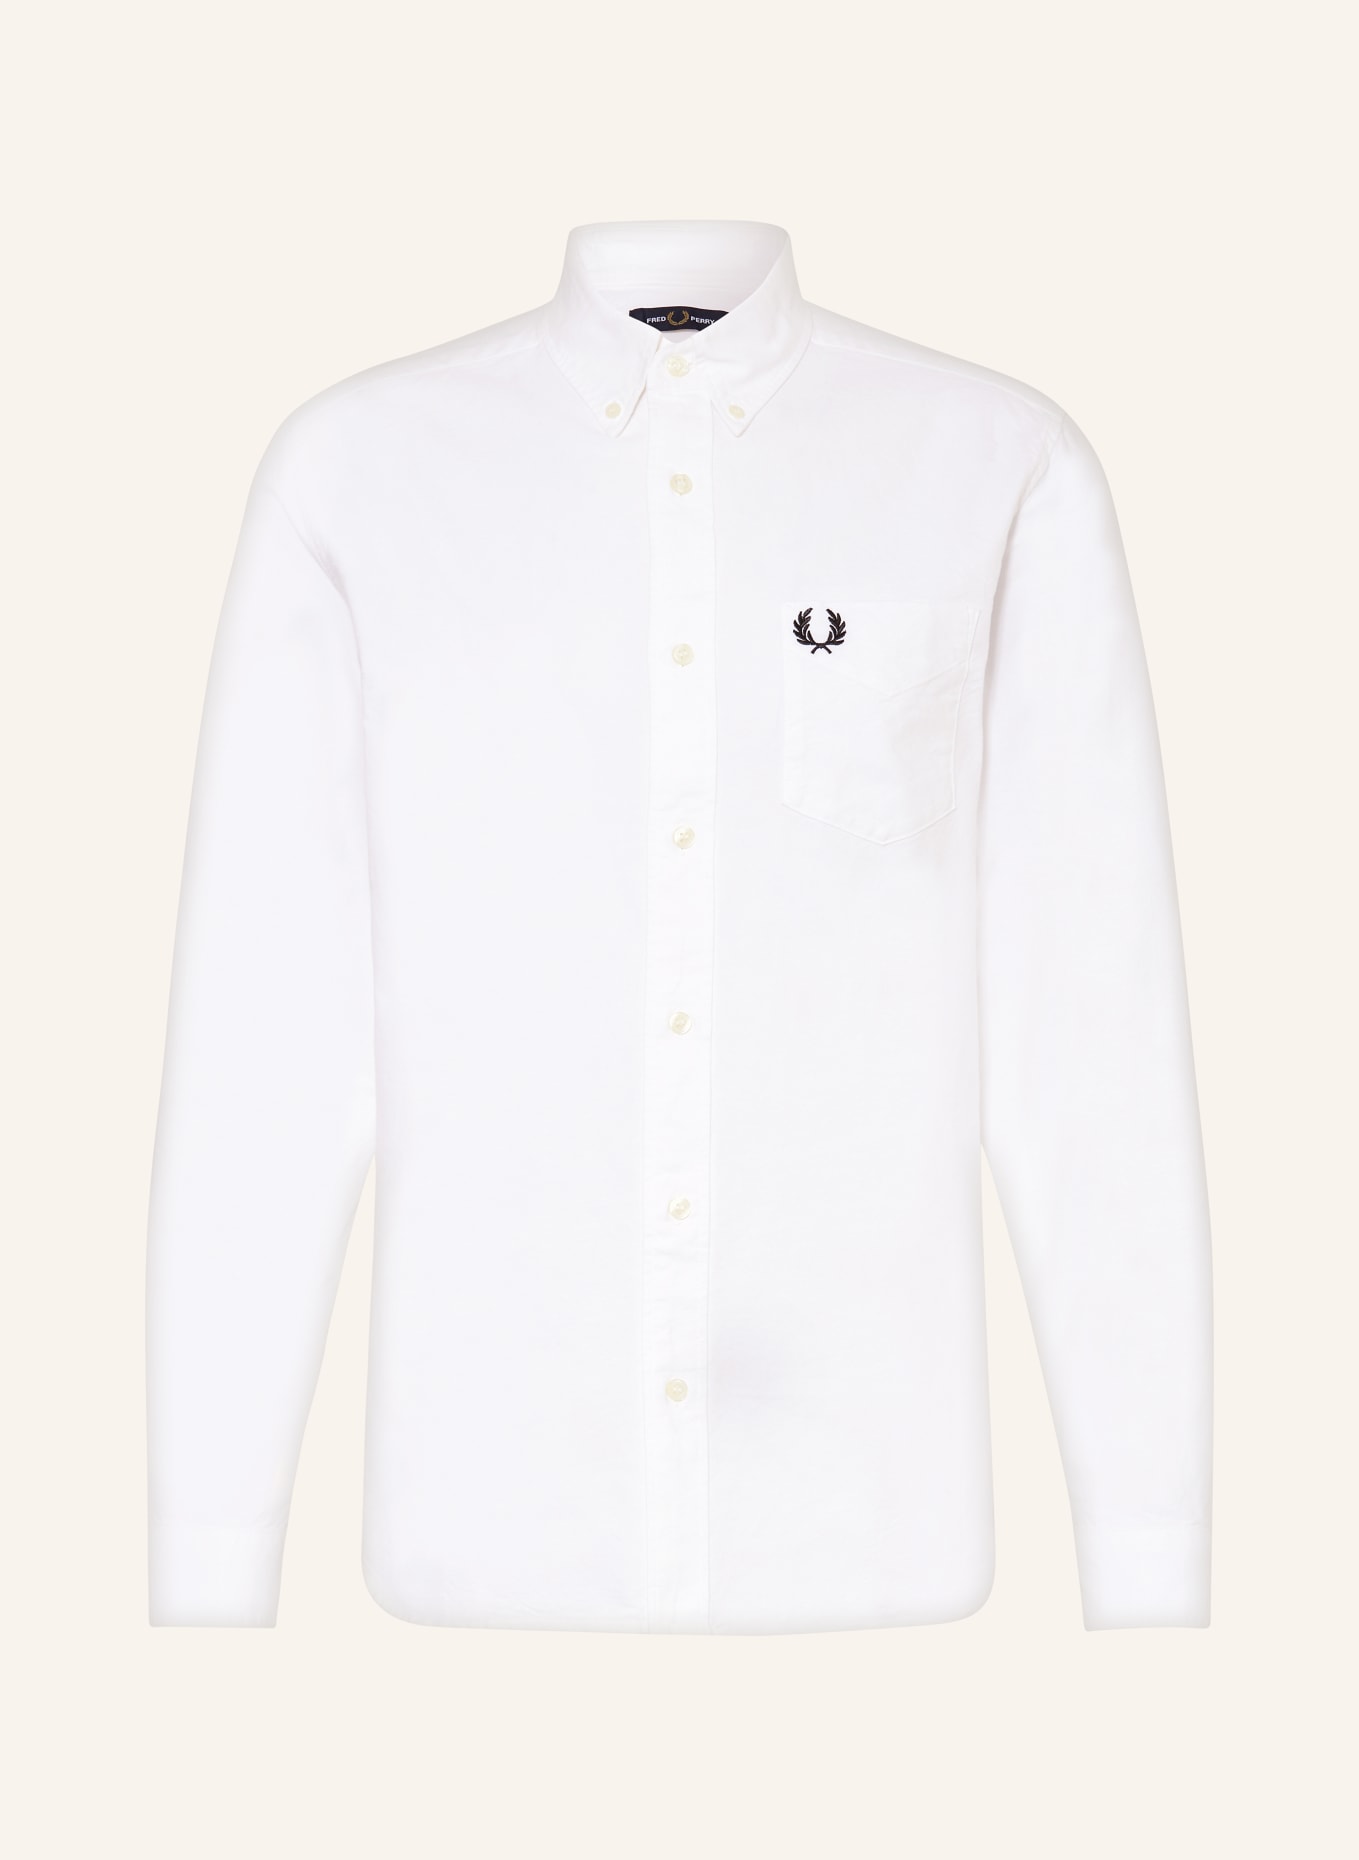 FRED PERRY Hemd Regular Fit, Farbe: WEISS (Bild 1)